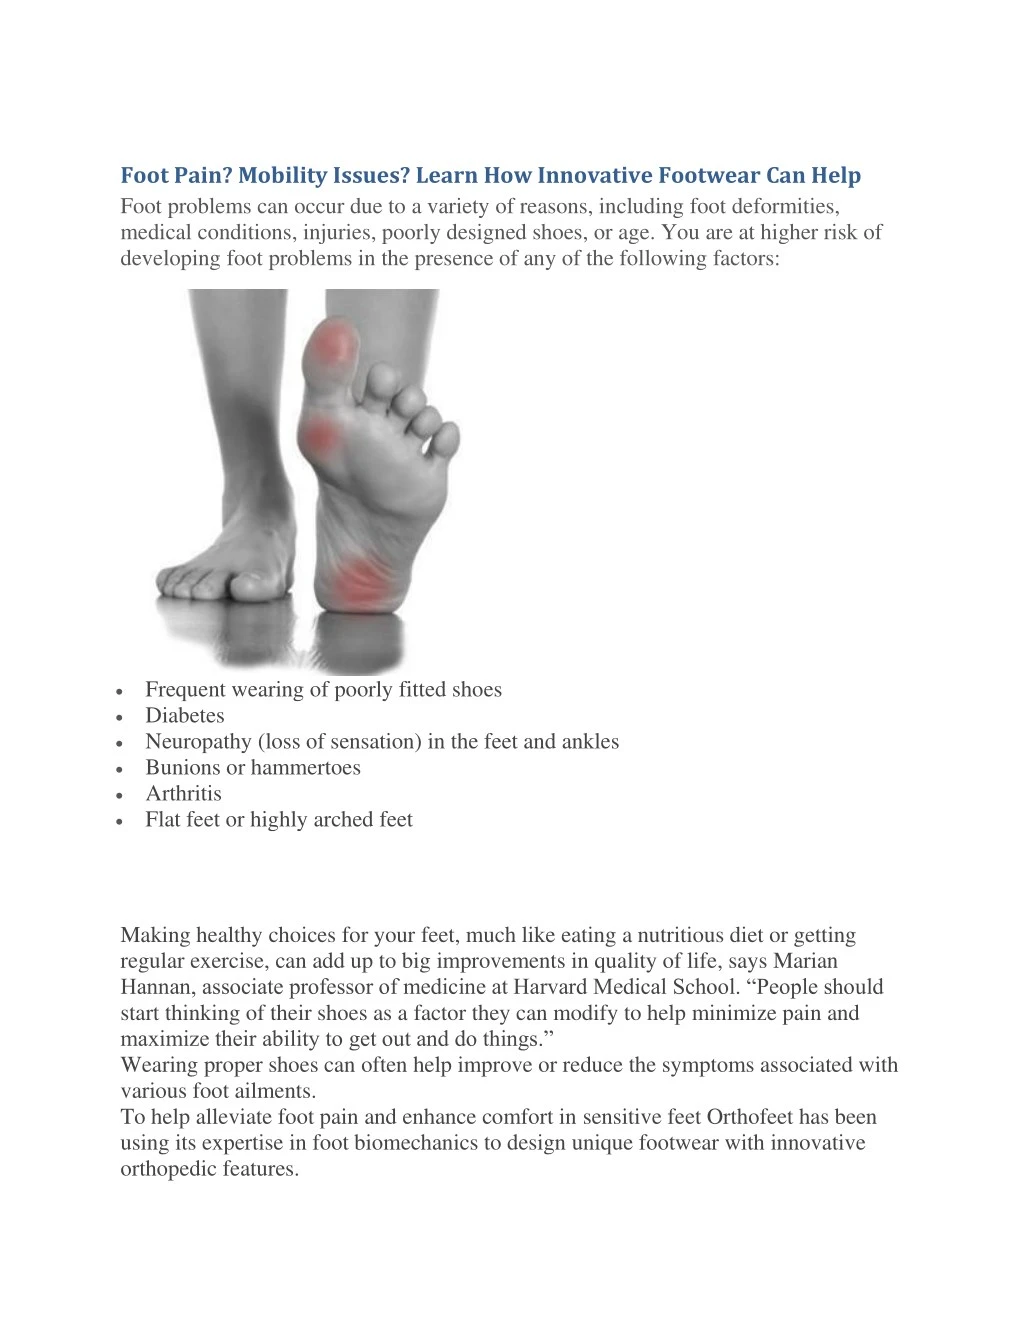 foot pain mobility issues learn how innovative